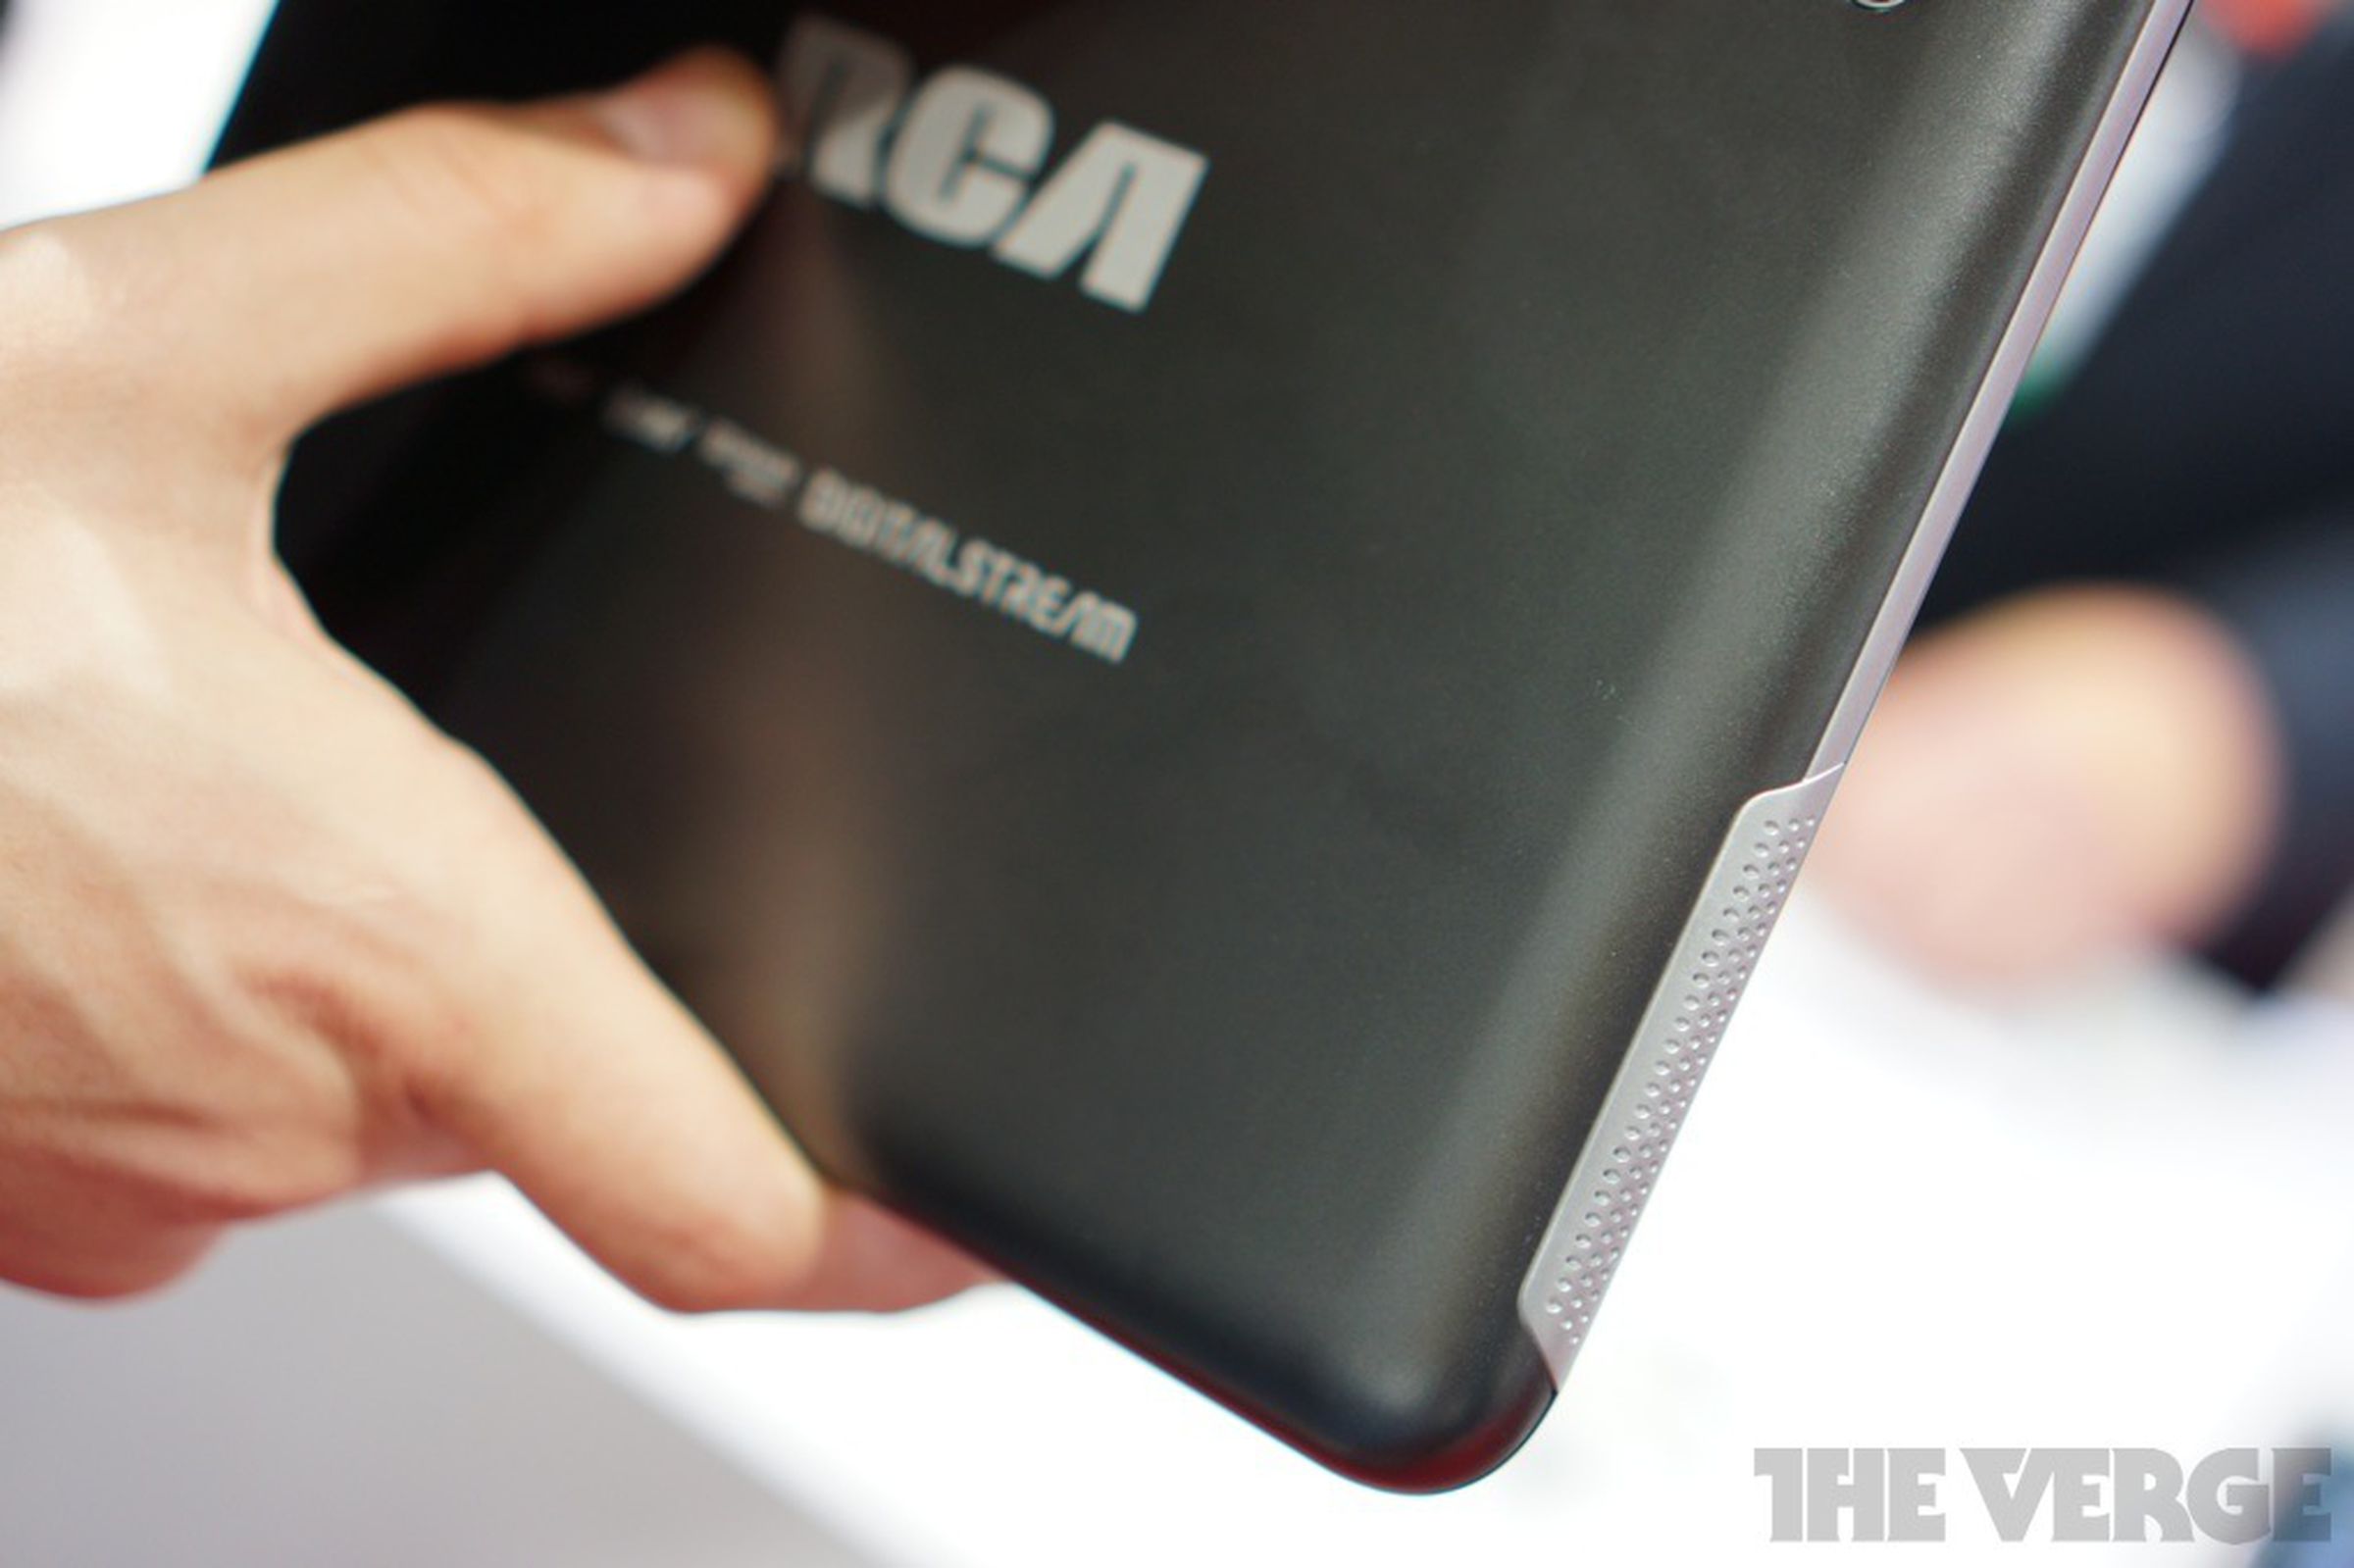 RCA Mobile TV tablet hands-on photos